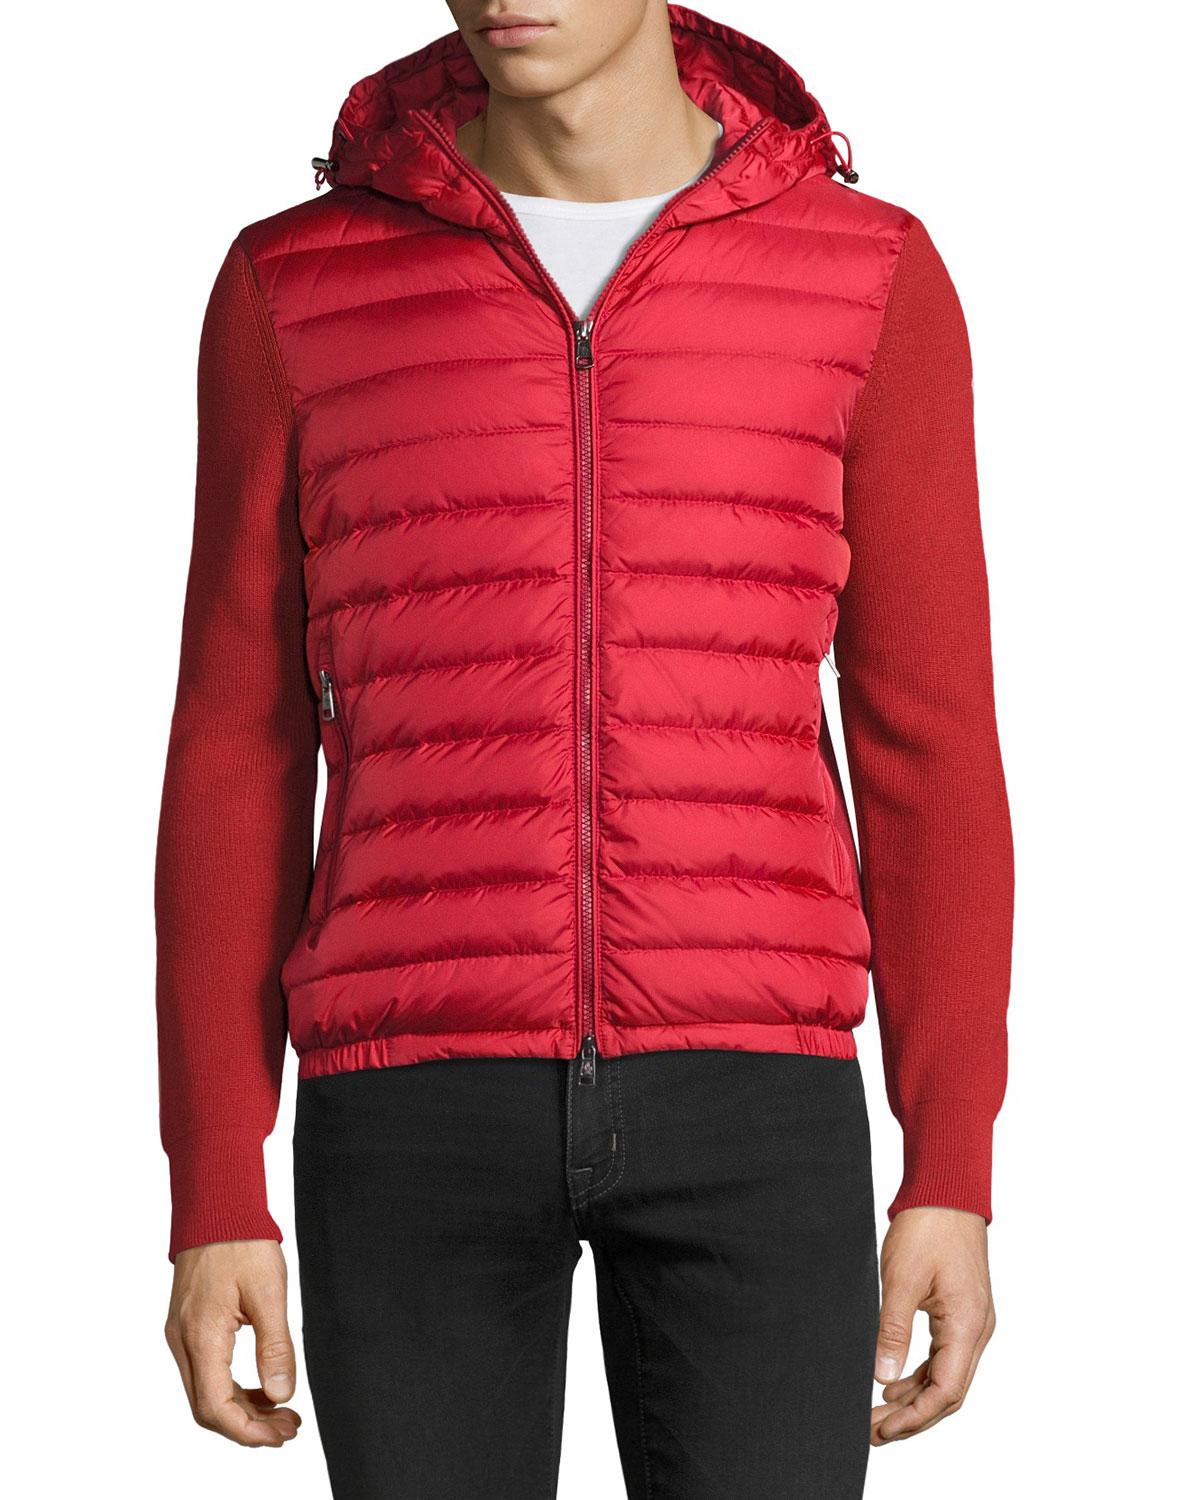 Moncler Hooded Puffer-front Zip Sweater in Red for Men - Lyst